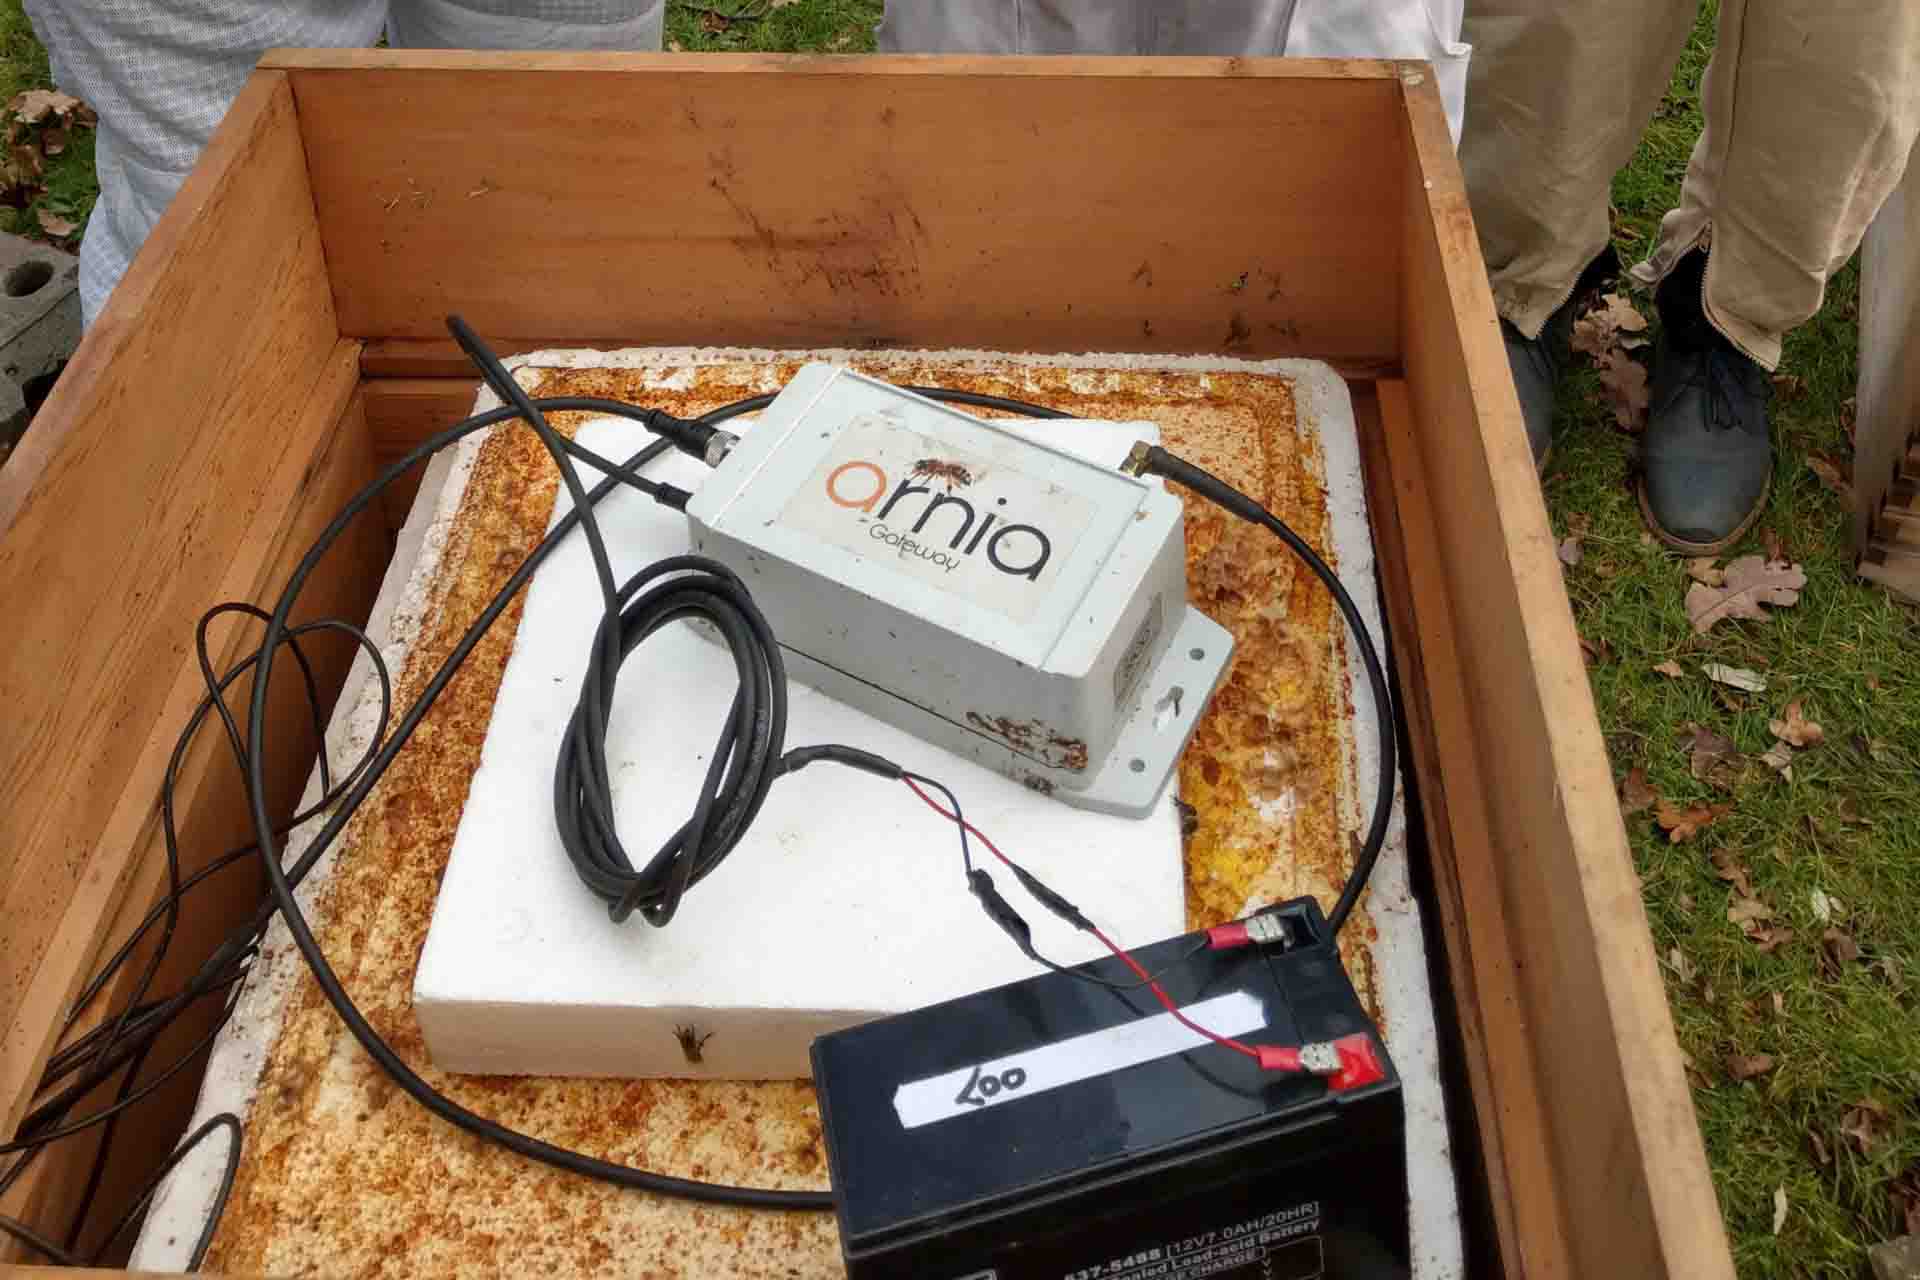 Arnia monitoring system attached to battery inside the wooden honeybee hive.